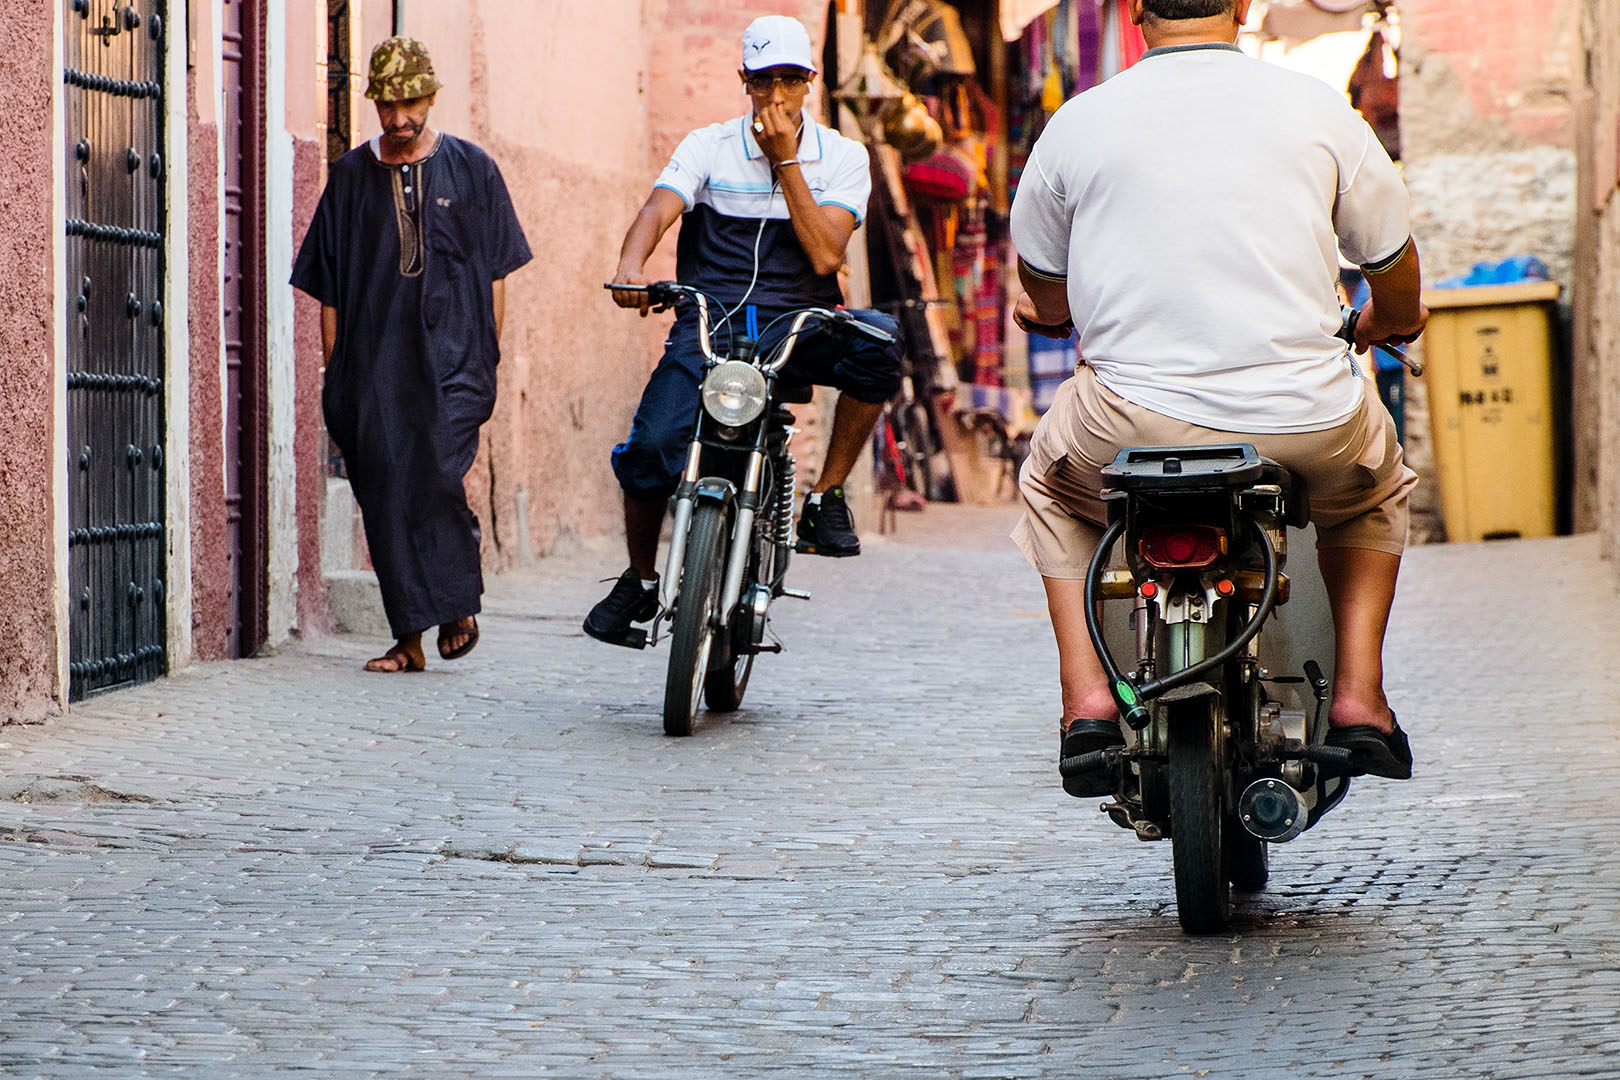 Scooters coming and going on side street in Marrakech Bazaar